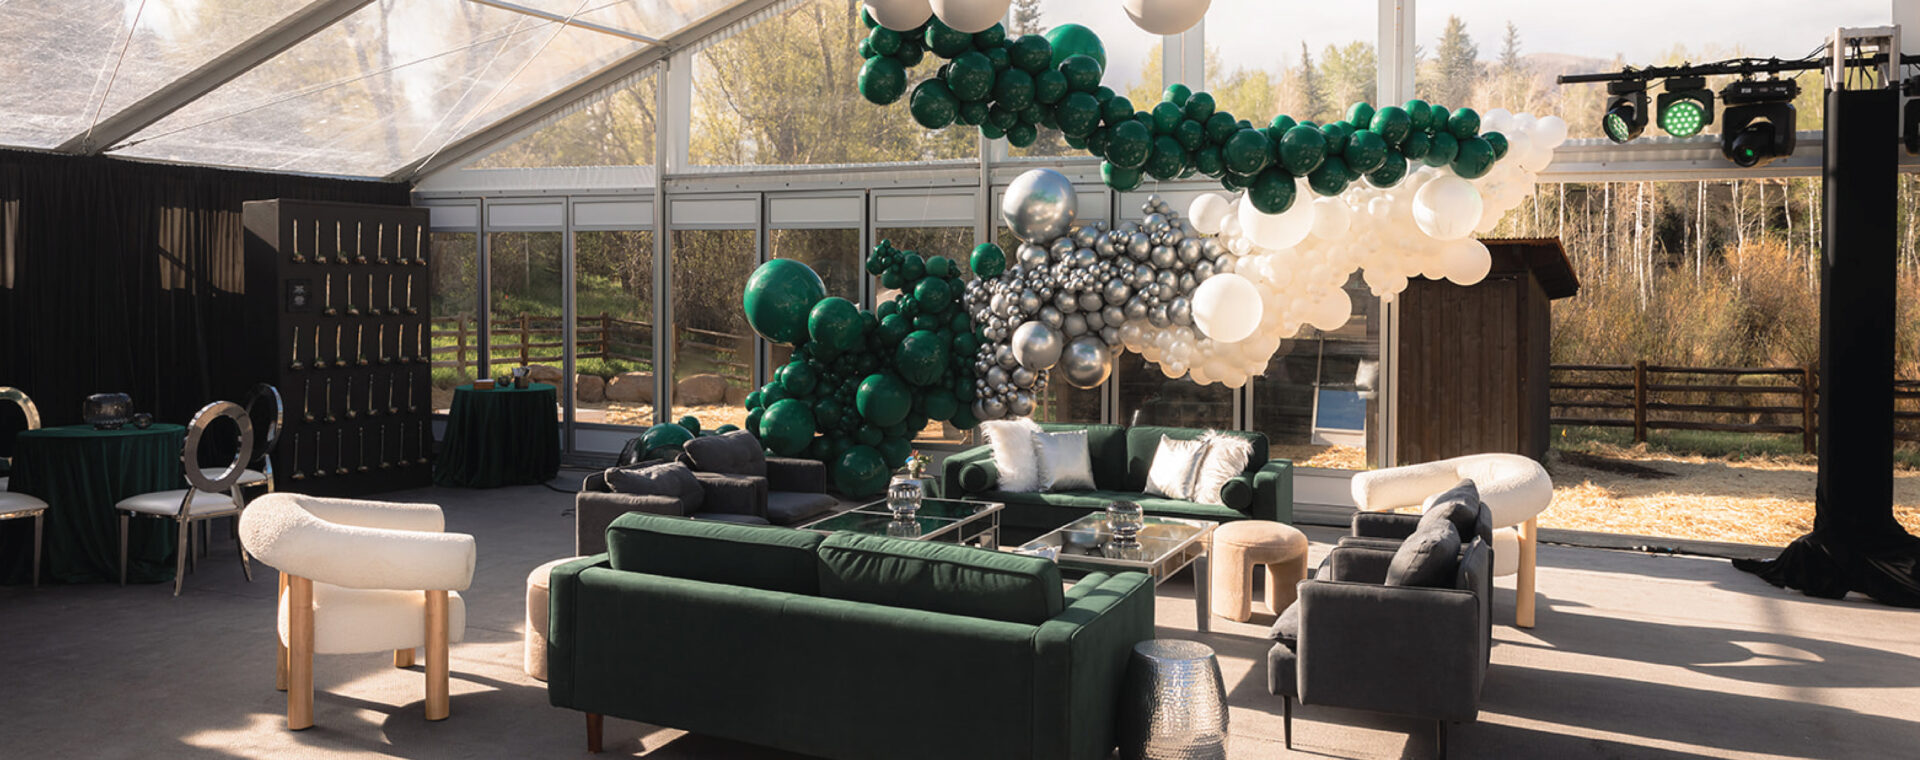 Dark green lounge furniture in a tent with green, silver and cream balloons in the background.